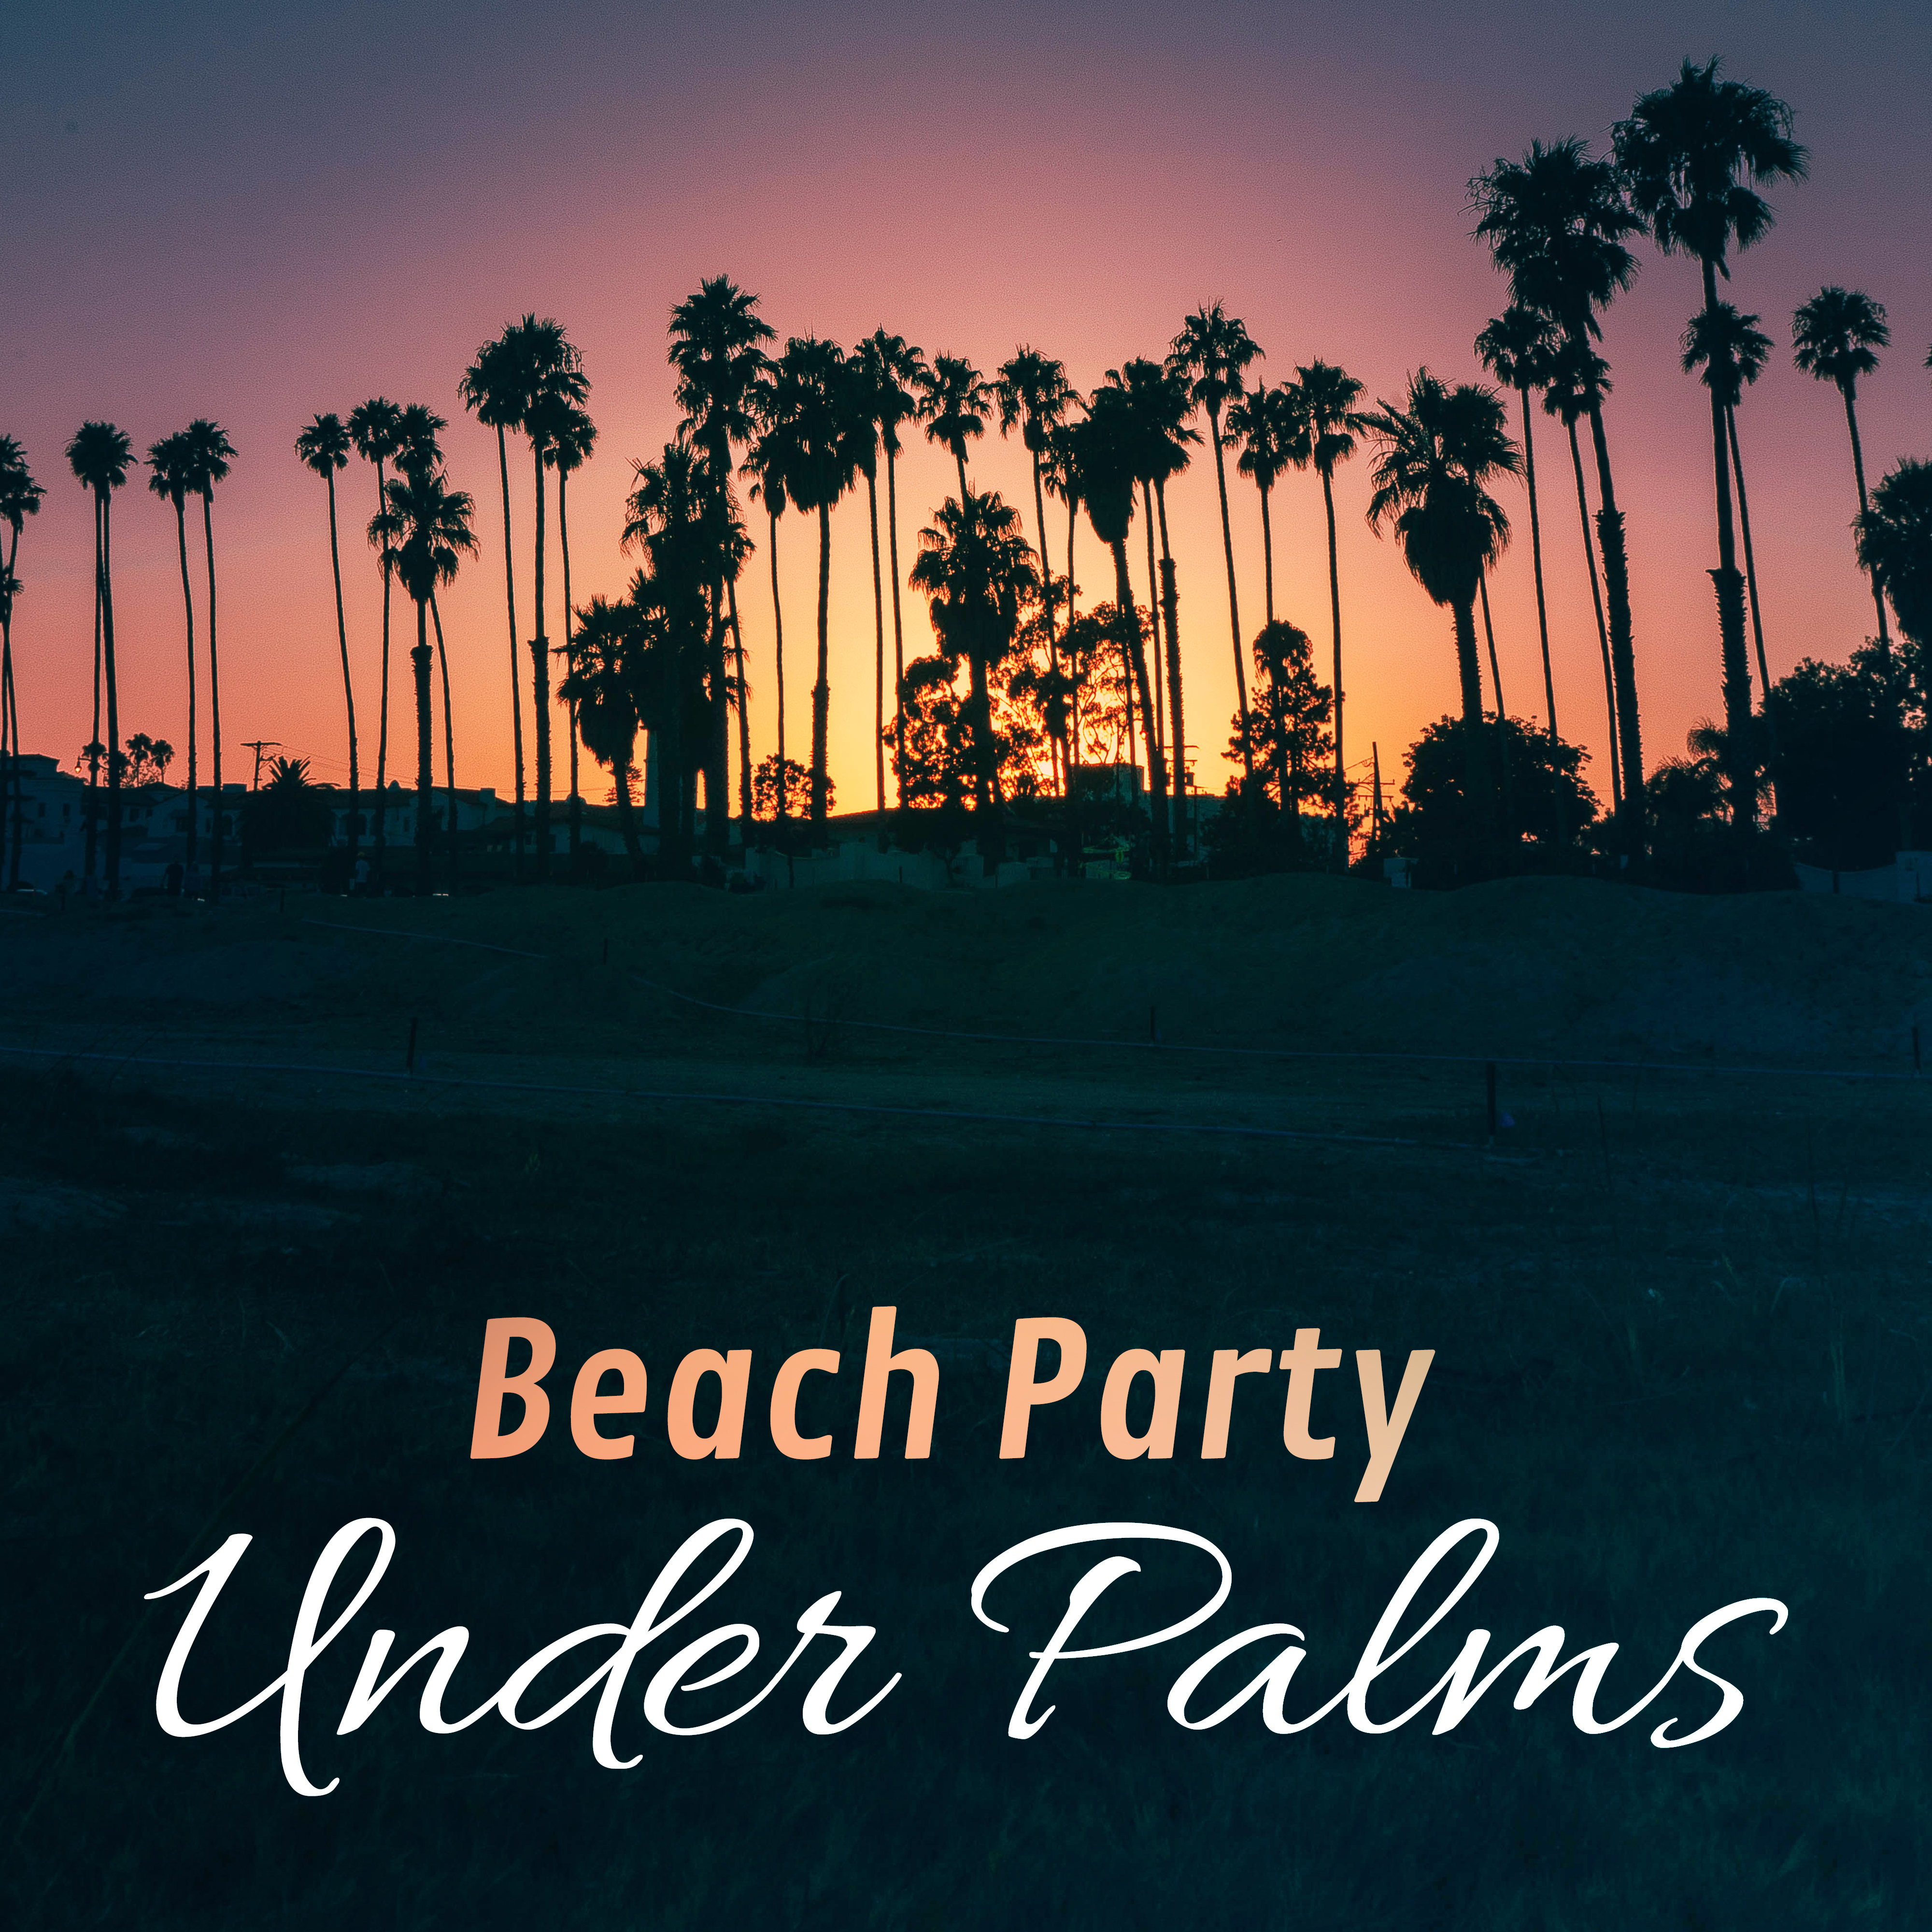 Beach Party Under Palms – Tropical Lounge Music, Chill Out, Exotic Island, Ambient Summer, Hot Music